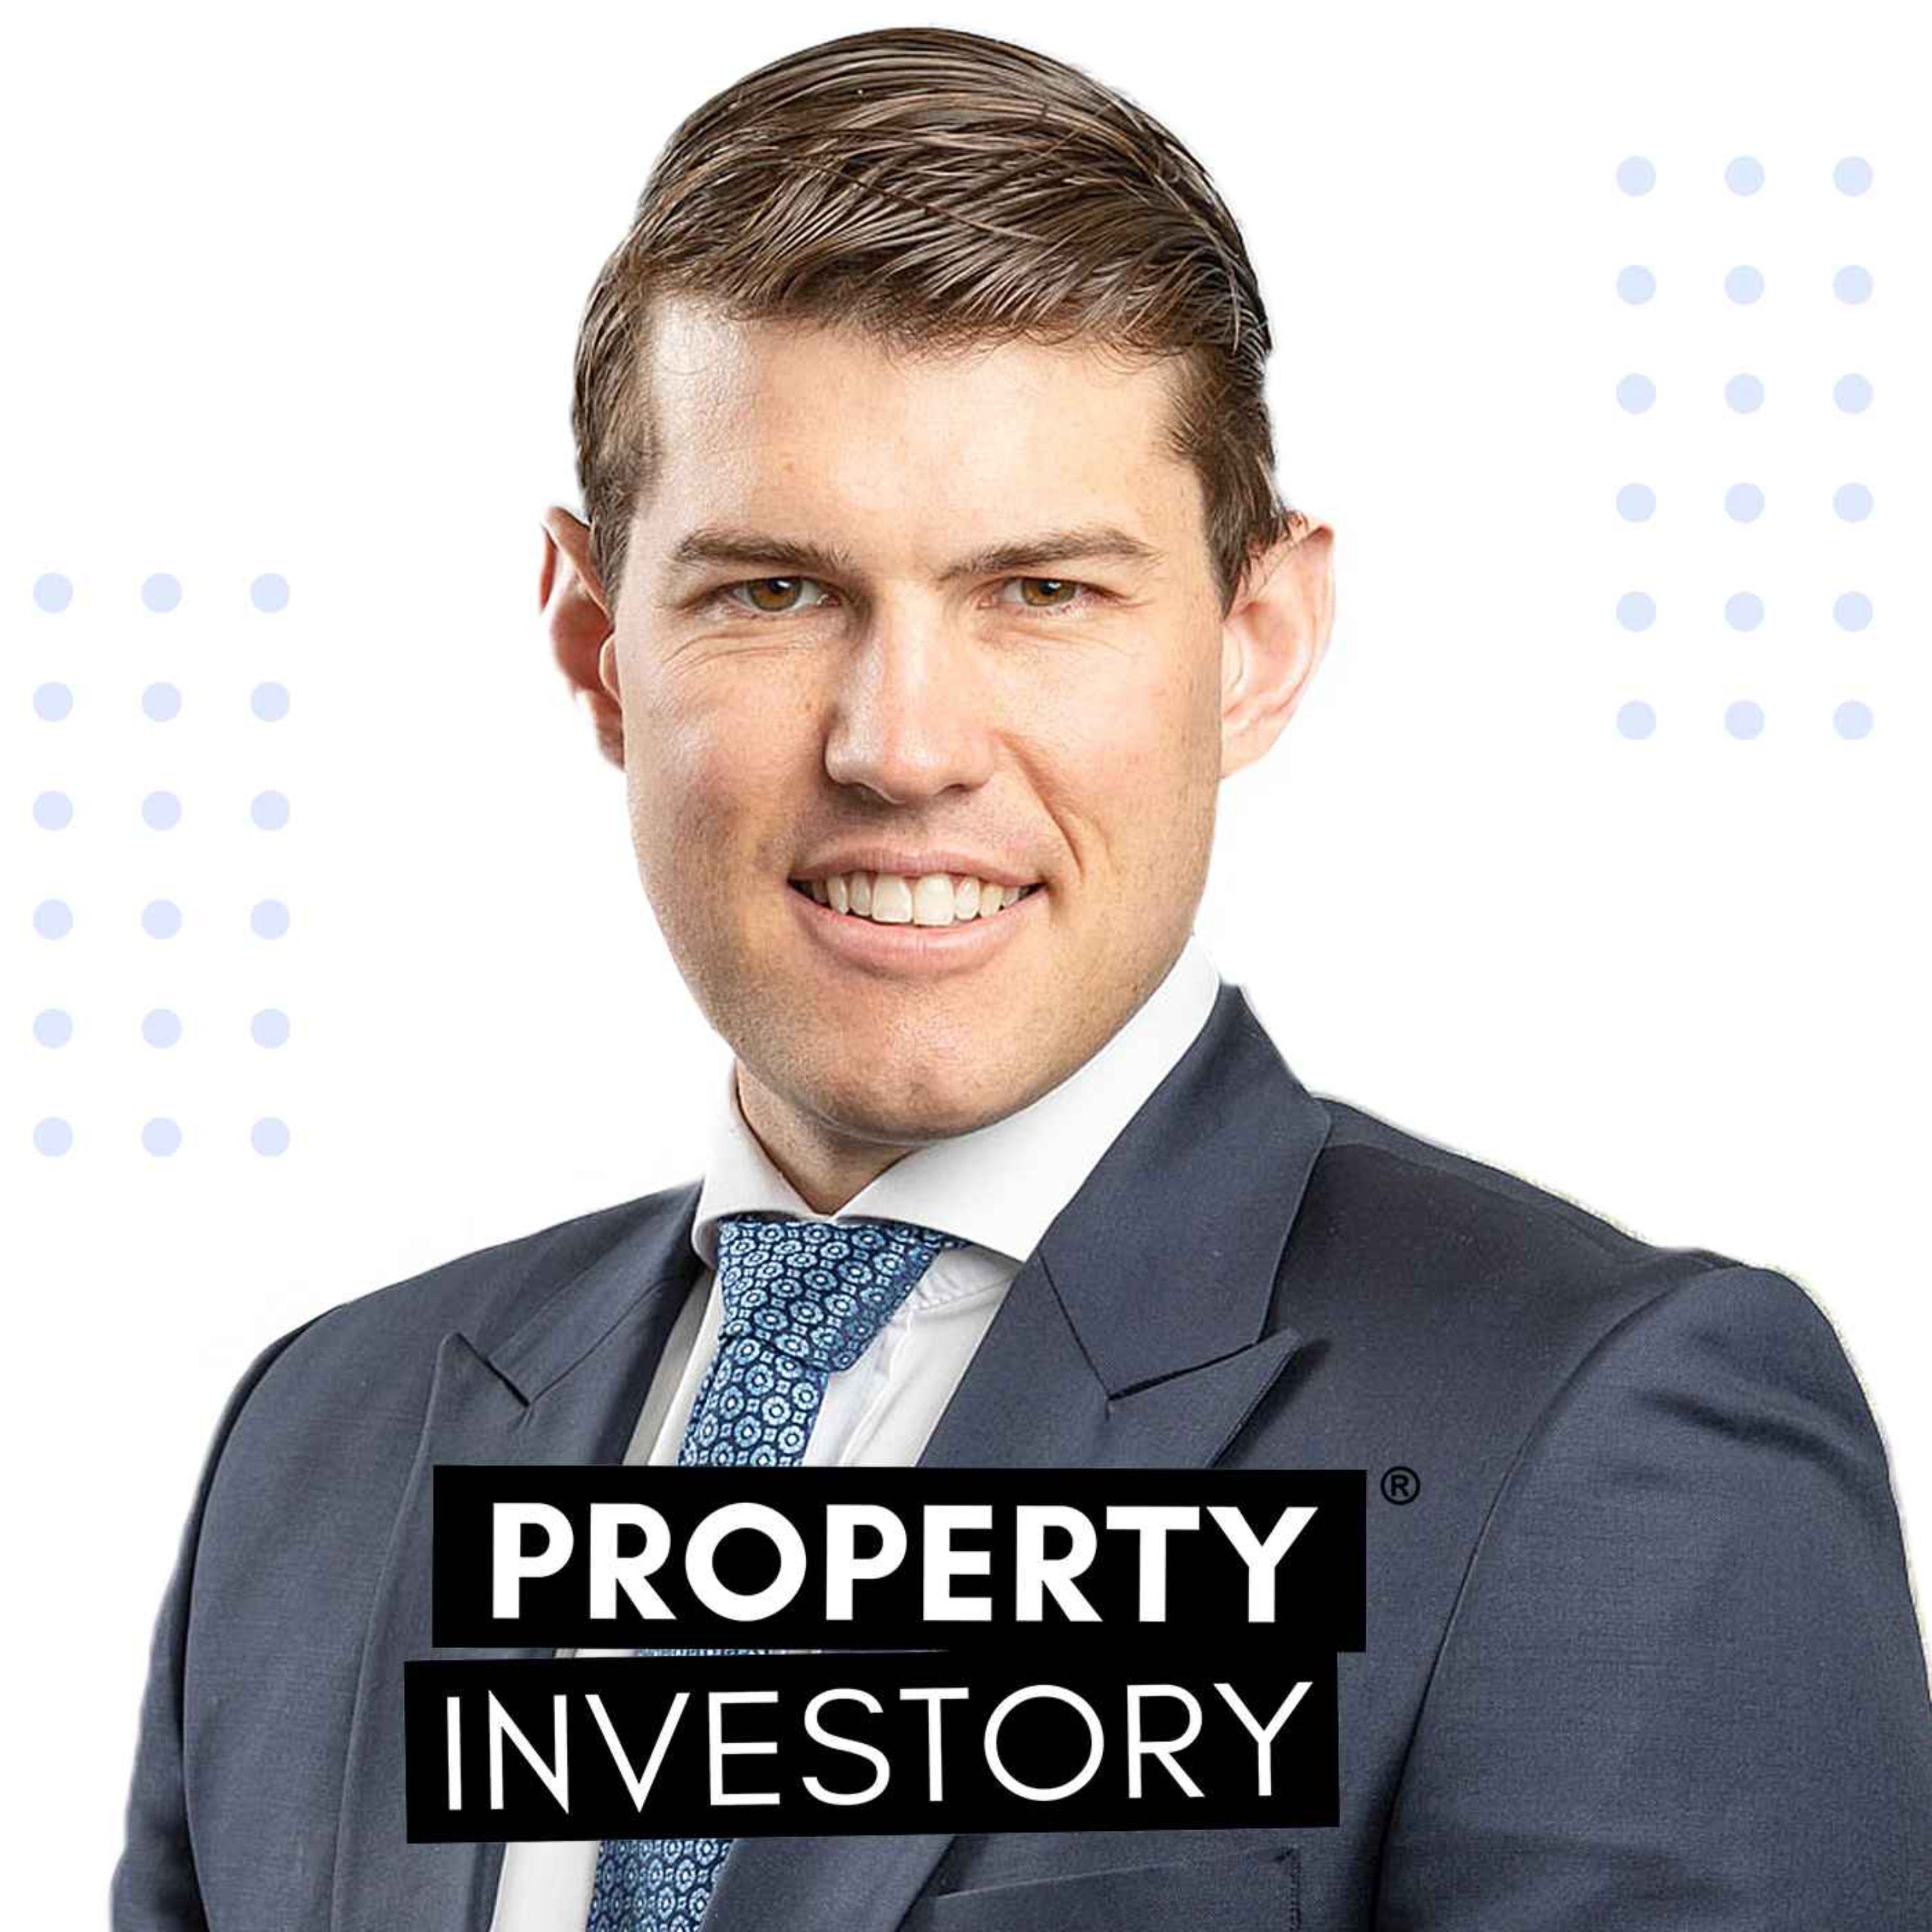 How To Incorporate Your Experience In Another Industry Into Your Property Investing Journey With James Paver